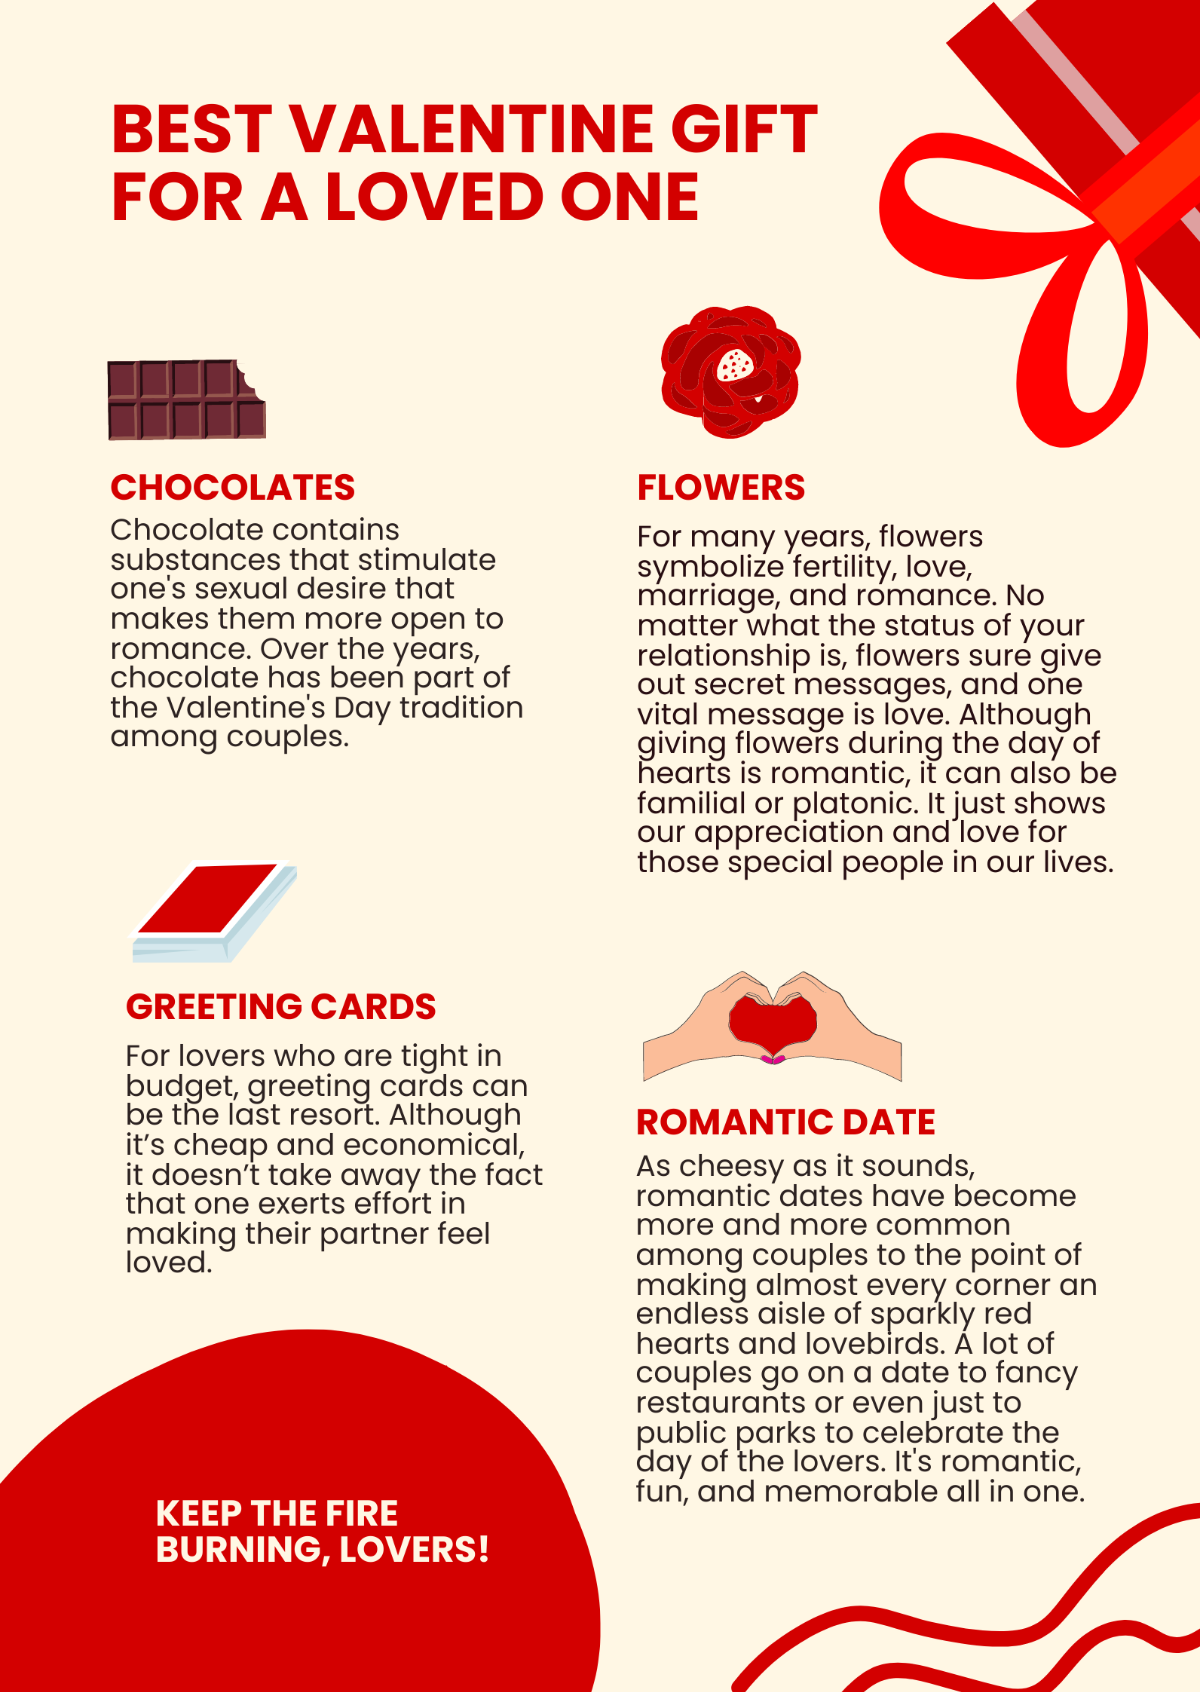 Valentine's Day Gifts Infographic Template